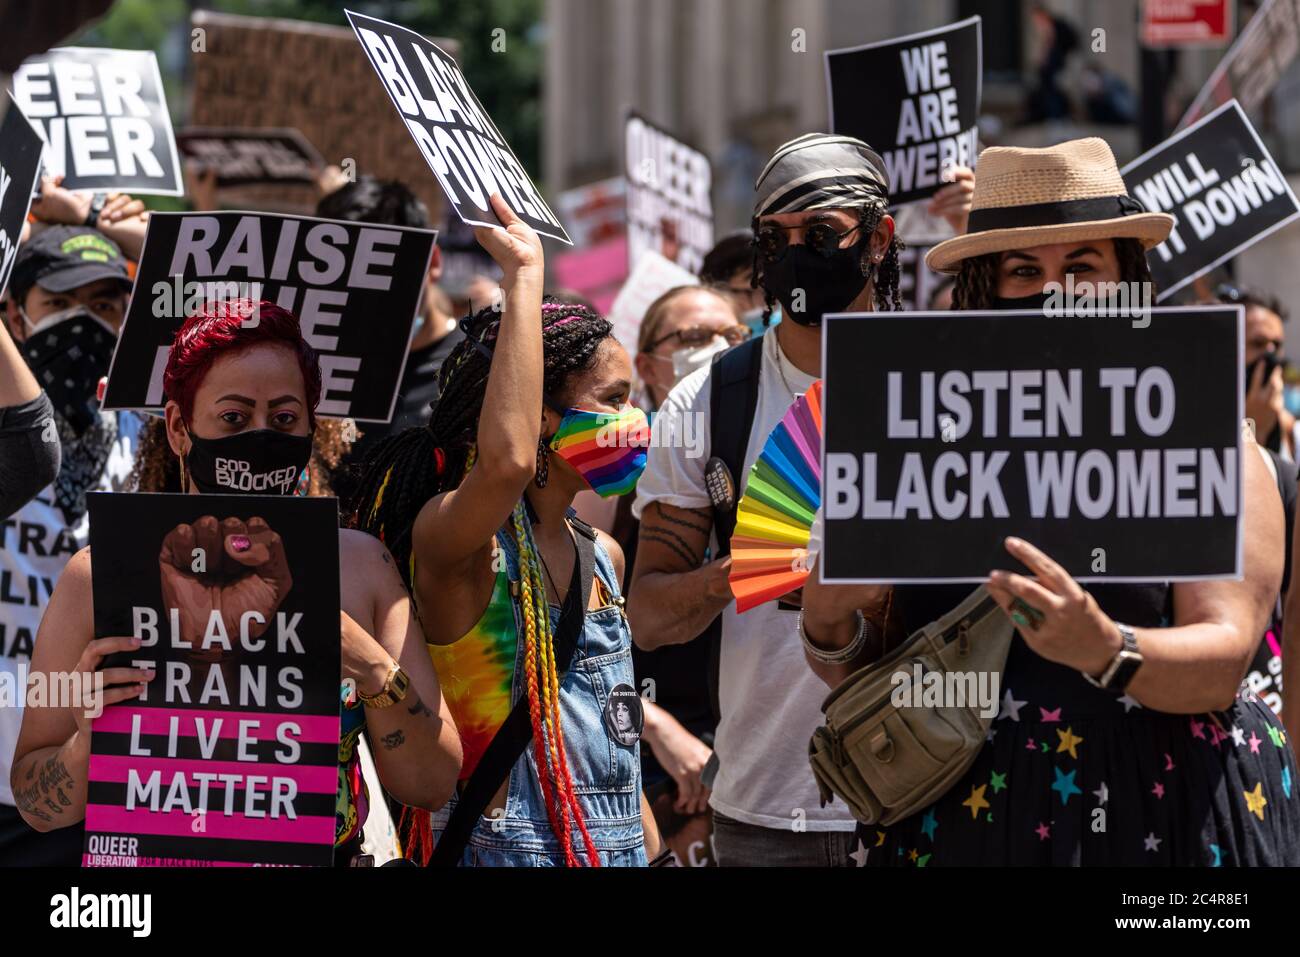 New York, New York, USA. 28th June, 2020. New York, New York, U.S.: People celebrate the 50th anniversary of the NYC Pride March during a Queer Liberation March in support for Black Lives Matter and against police brutality at Foley Square. Credit: Corine Sciboz/ZUMA Wire/Alamy Live News Stock Photo